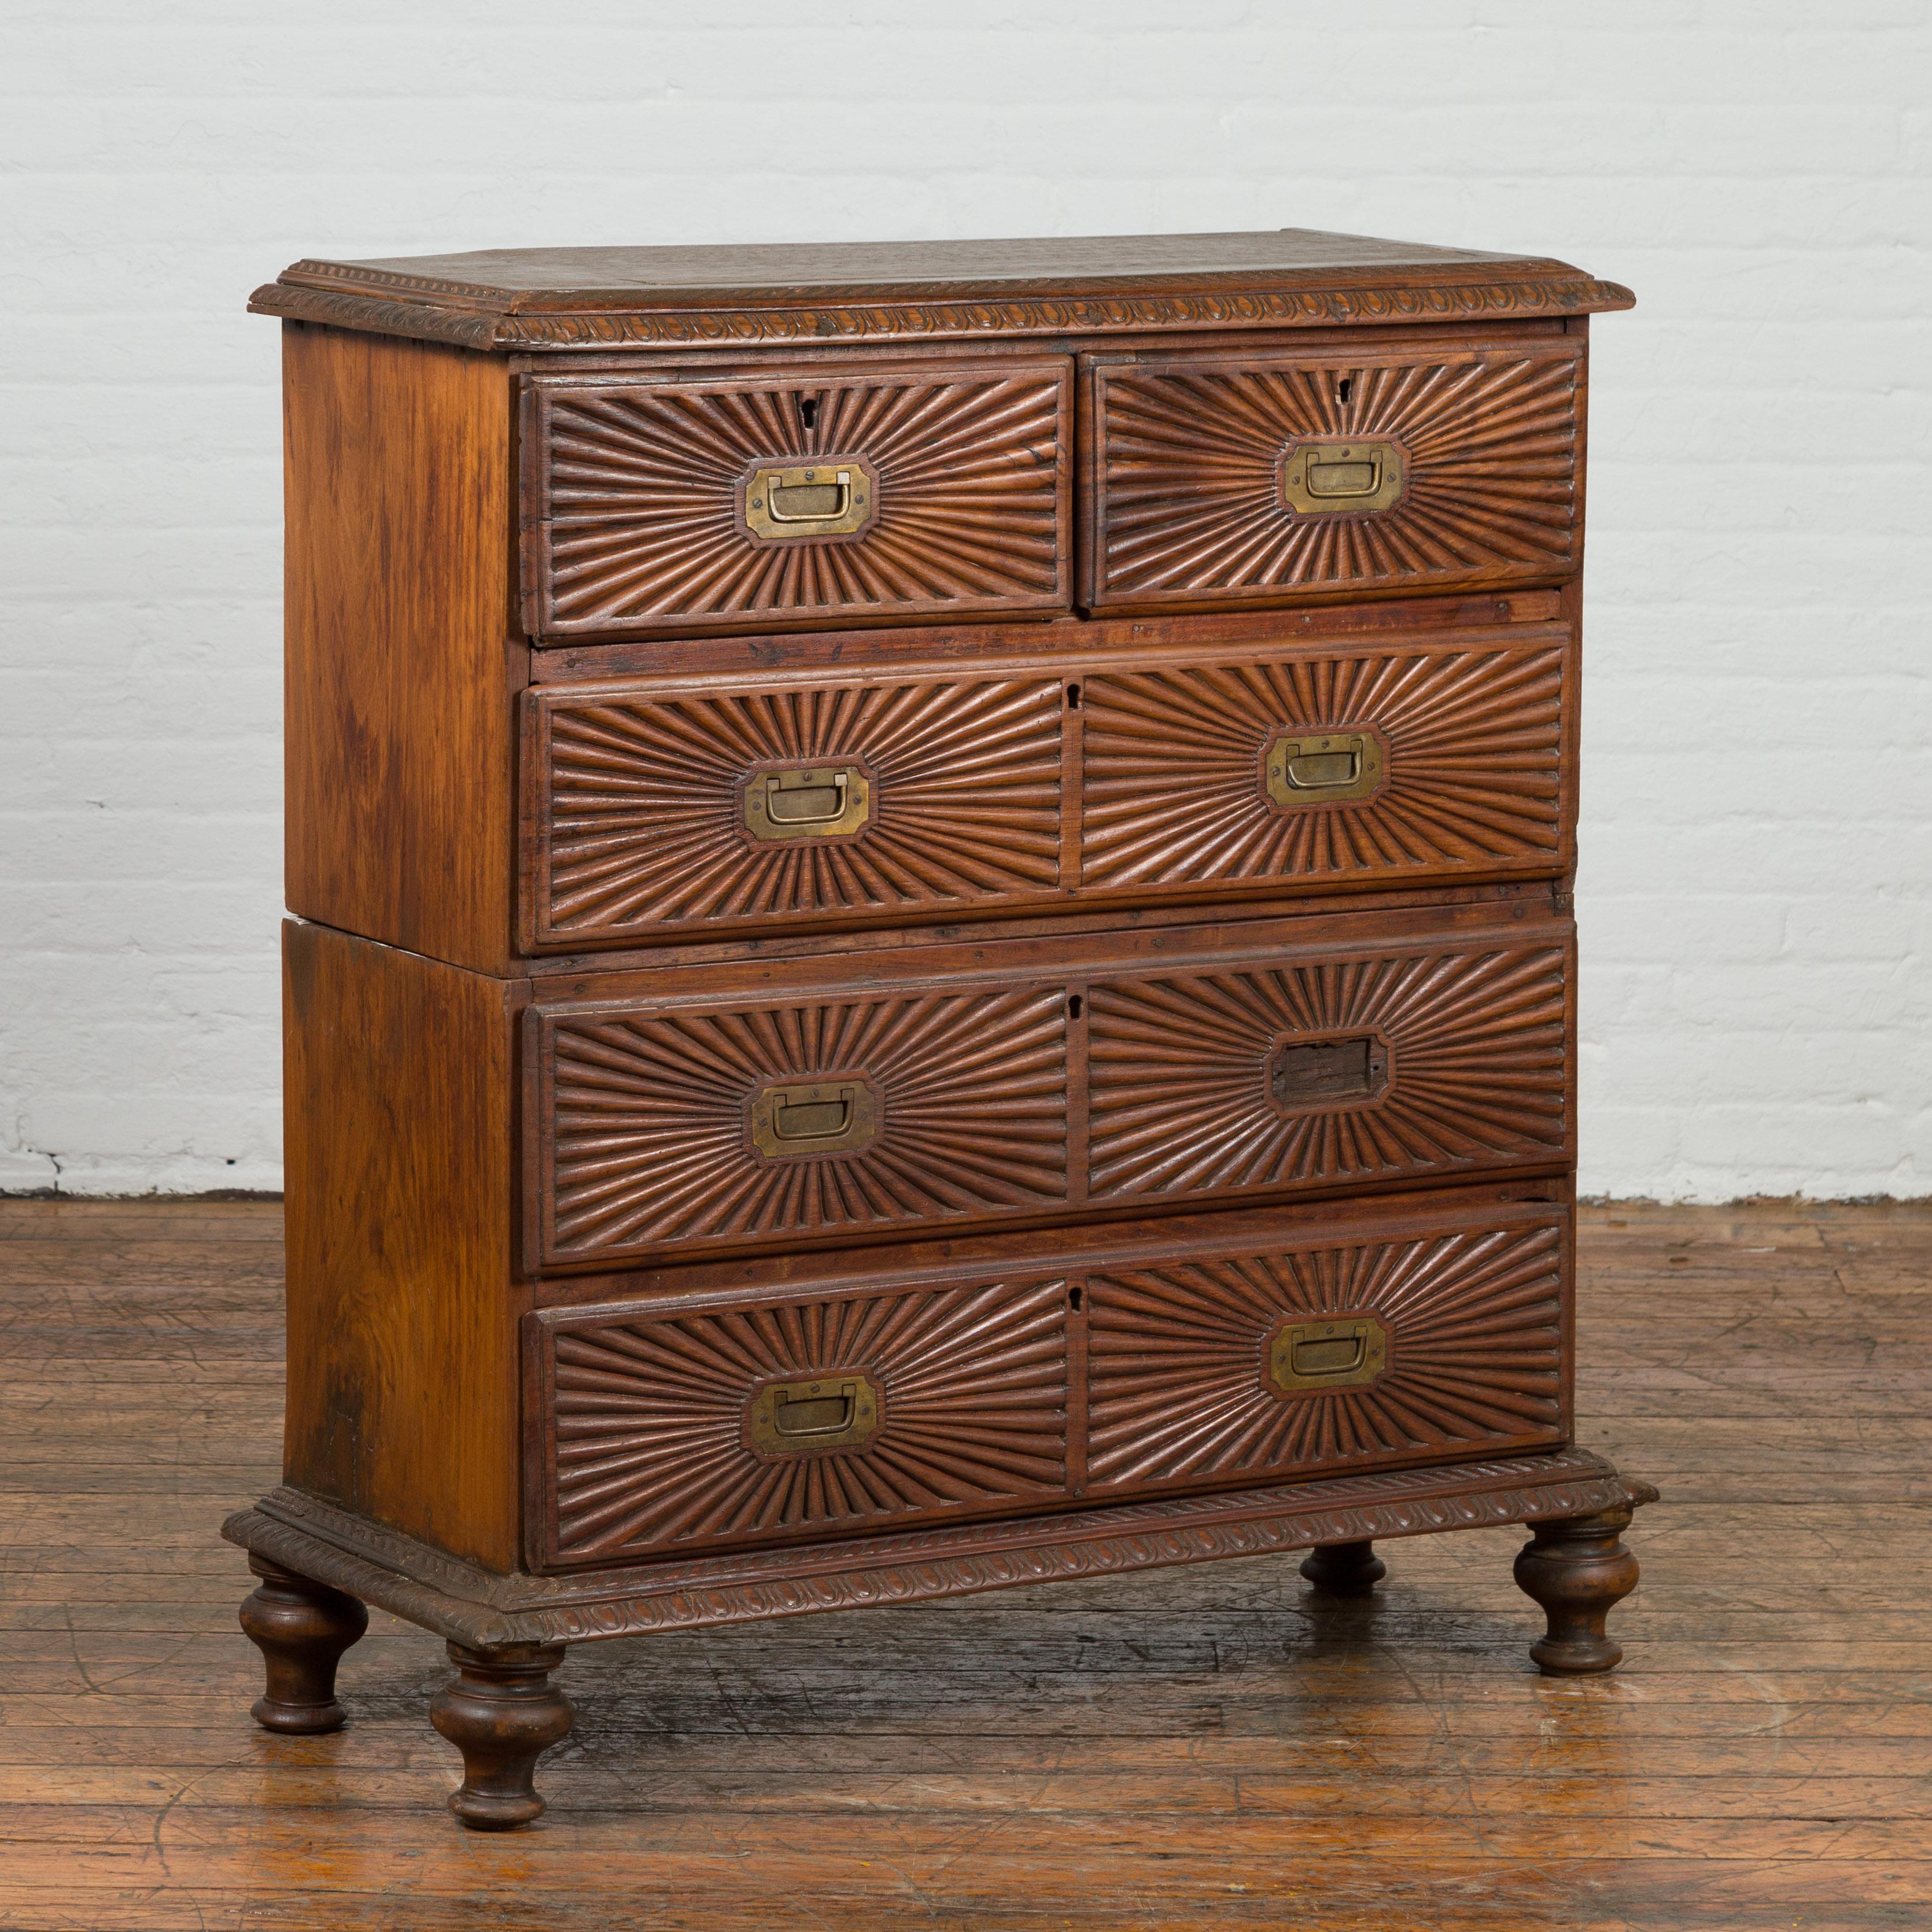 An Indonesian five-drawer chest from the 19th century, with carved sunburst and ovoid motifs. Created in Indonesia during the 19th century, this tall chest features a rectangular top with beveled edges surrounded by a carved ovoid frieze. The façade